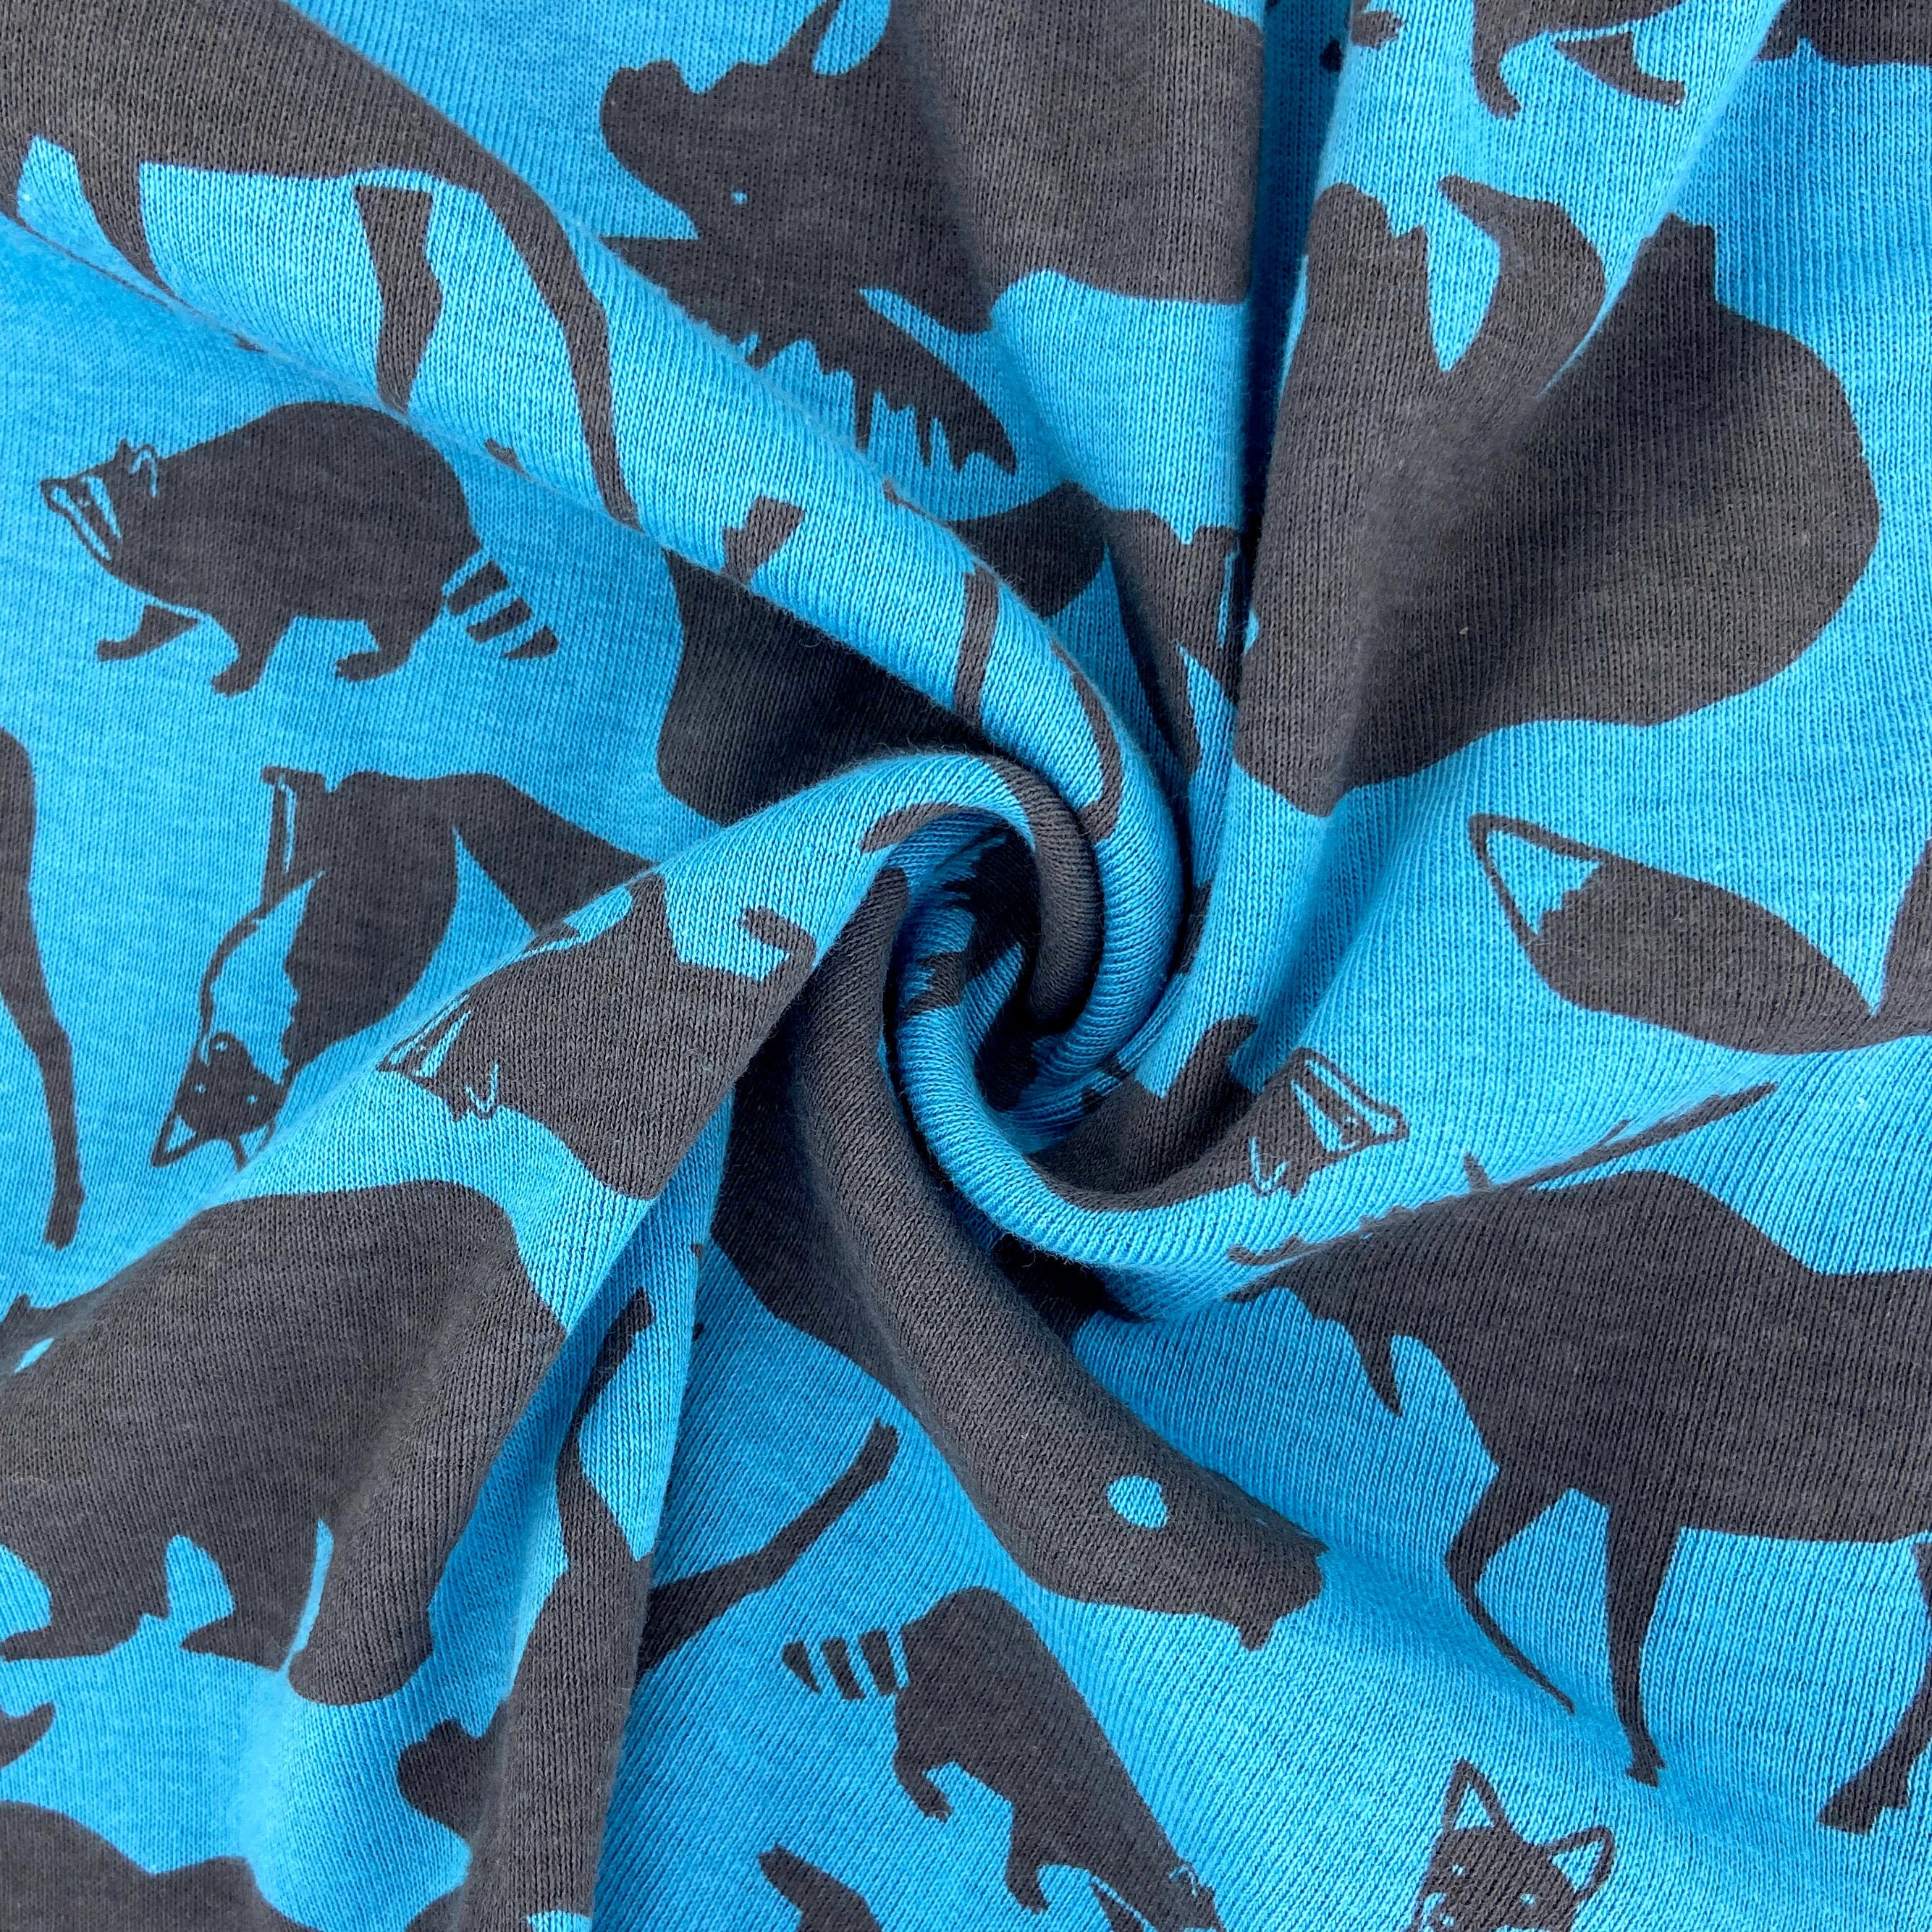 Soft T-Shirt Fabric Cotton Knit Boxer Pajama Shorts for Men with Woodland Creature Moose Print